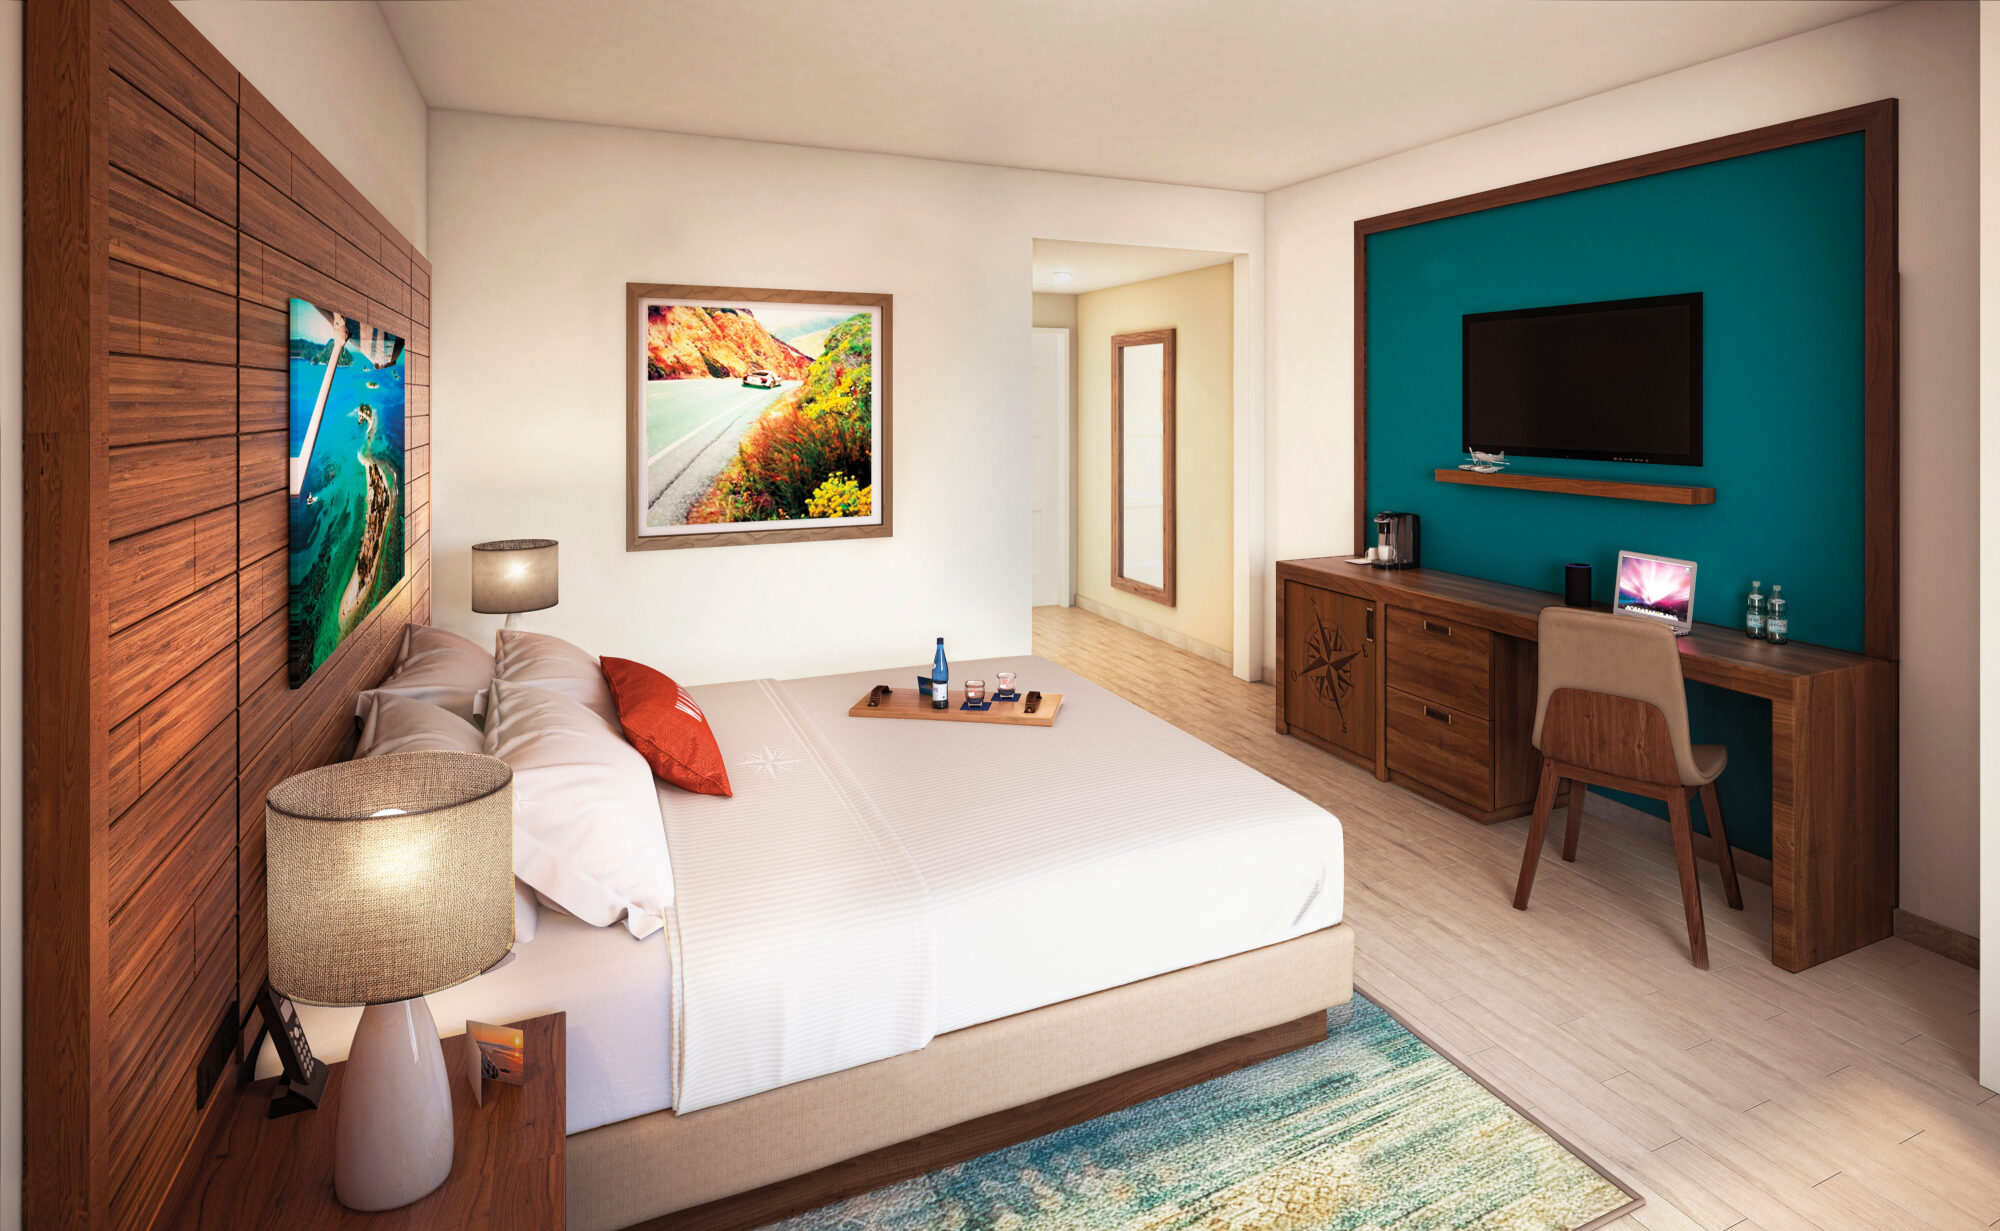 Hotel bedroom with wood wall and artwork.